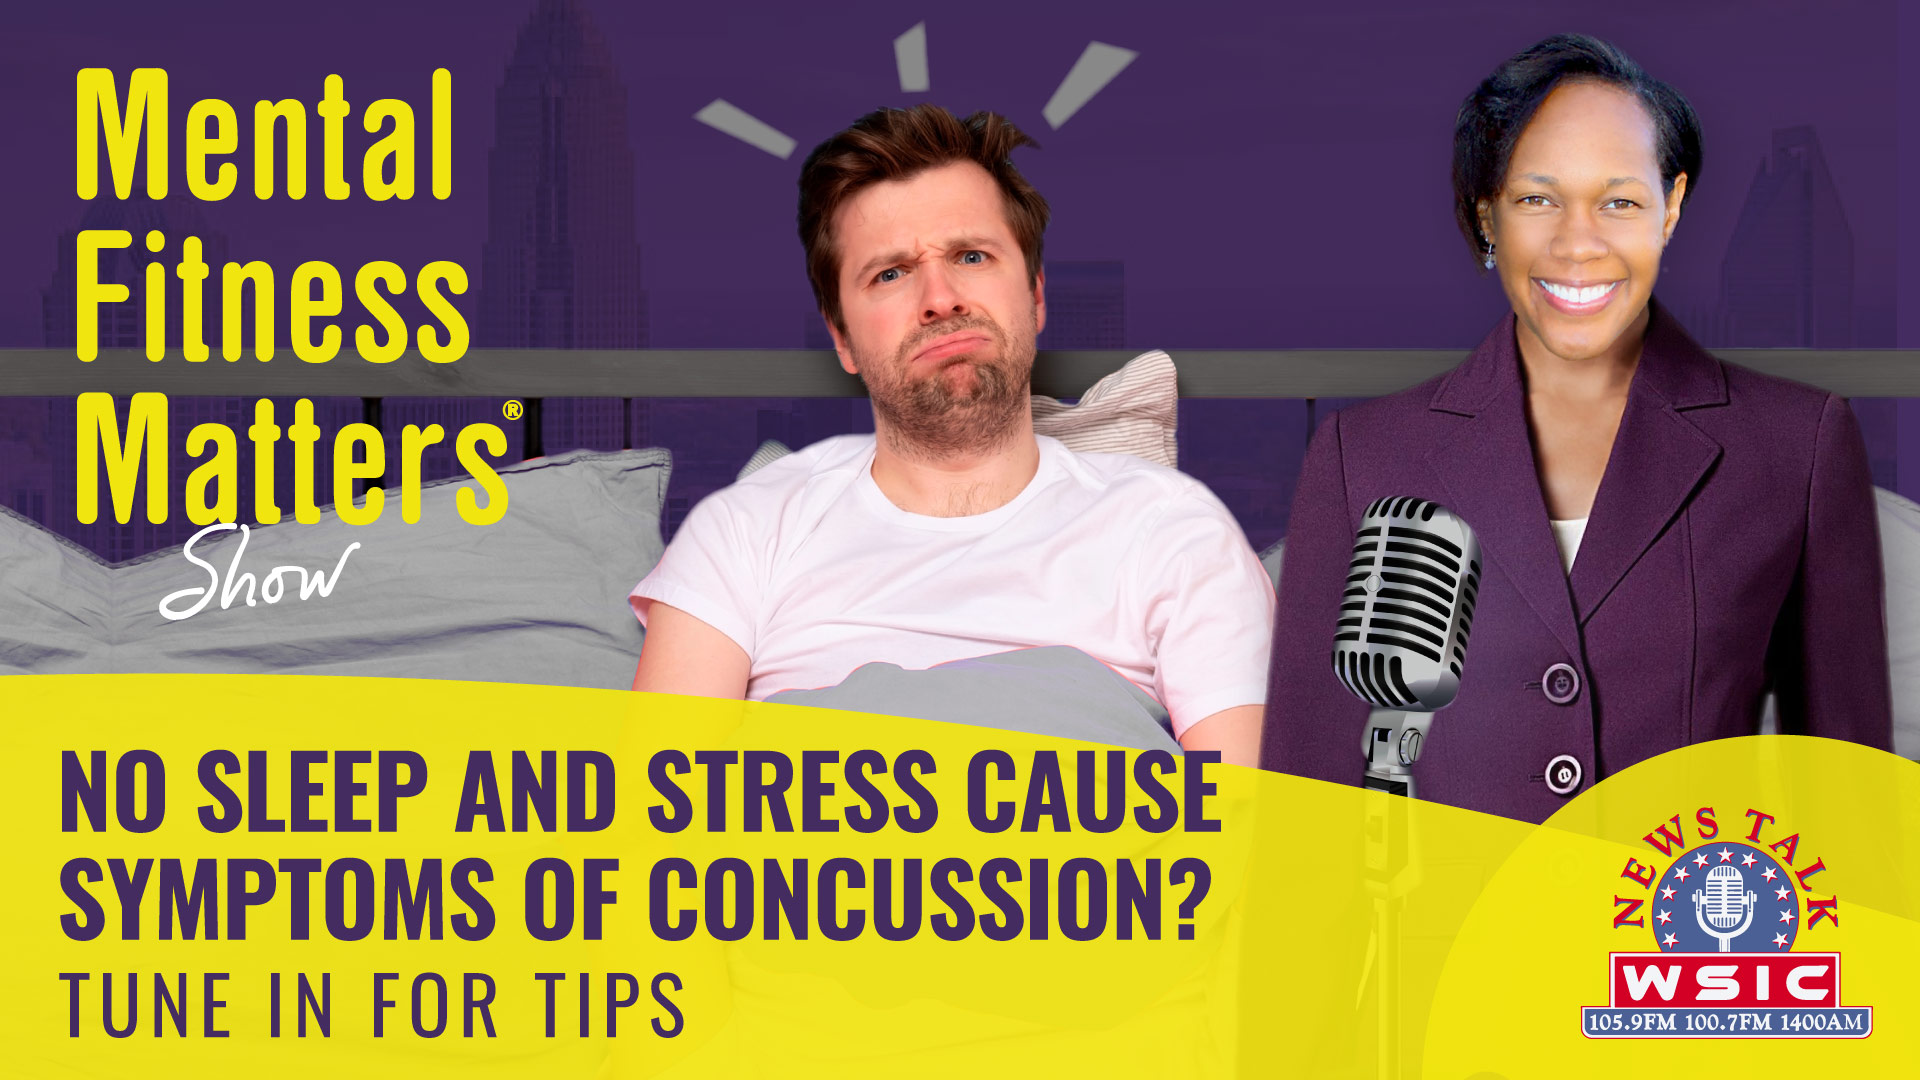 No Sleep and Stress Cause Symptoms of Concussion?